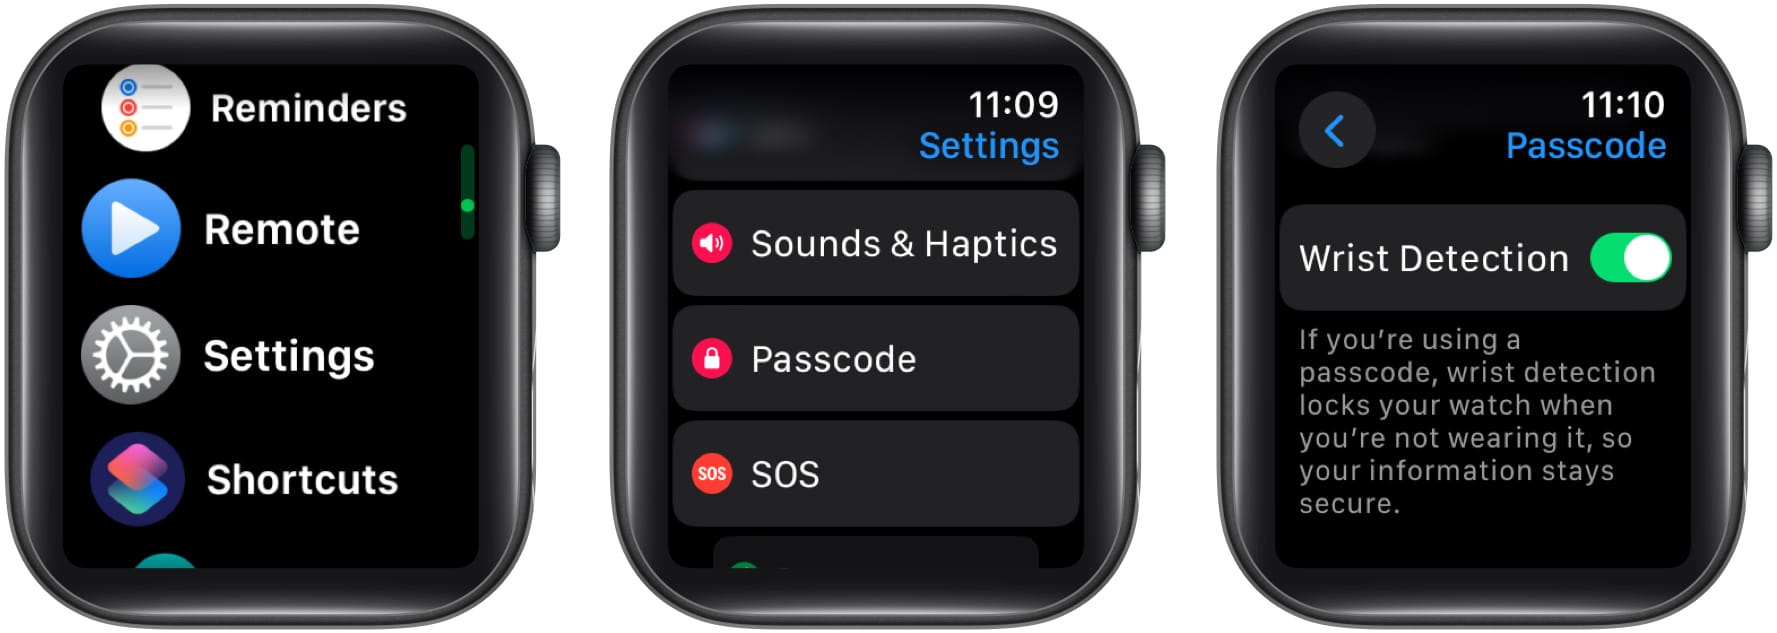 Select settings, passcode, wrist detection in apple watch